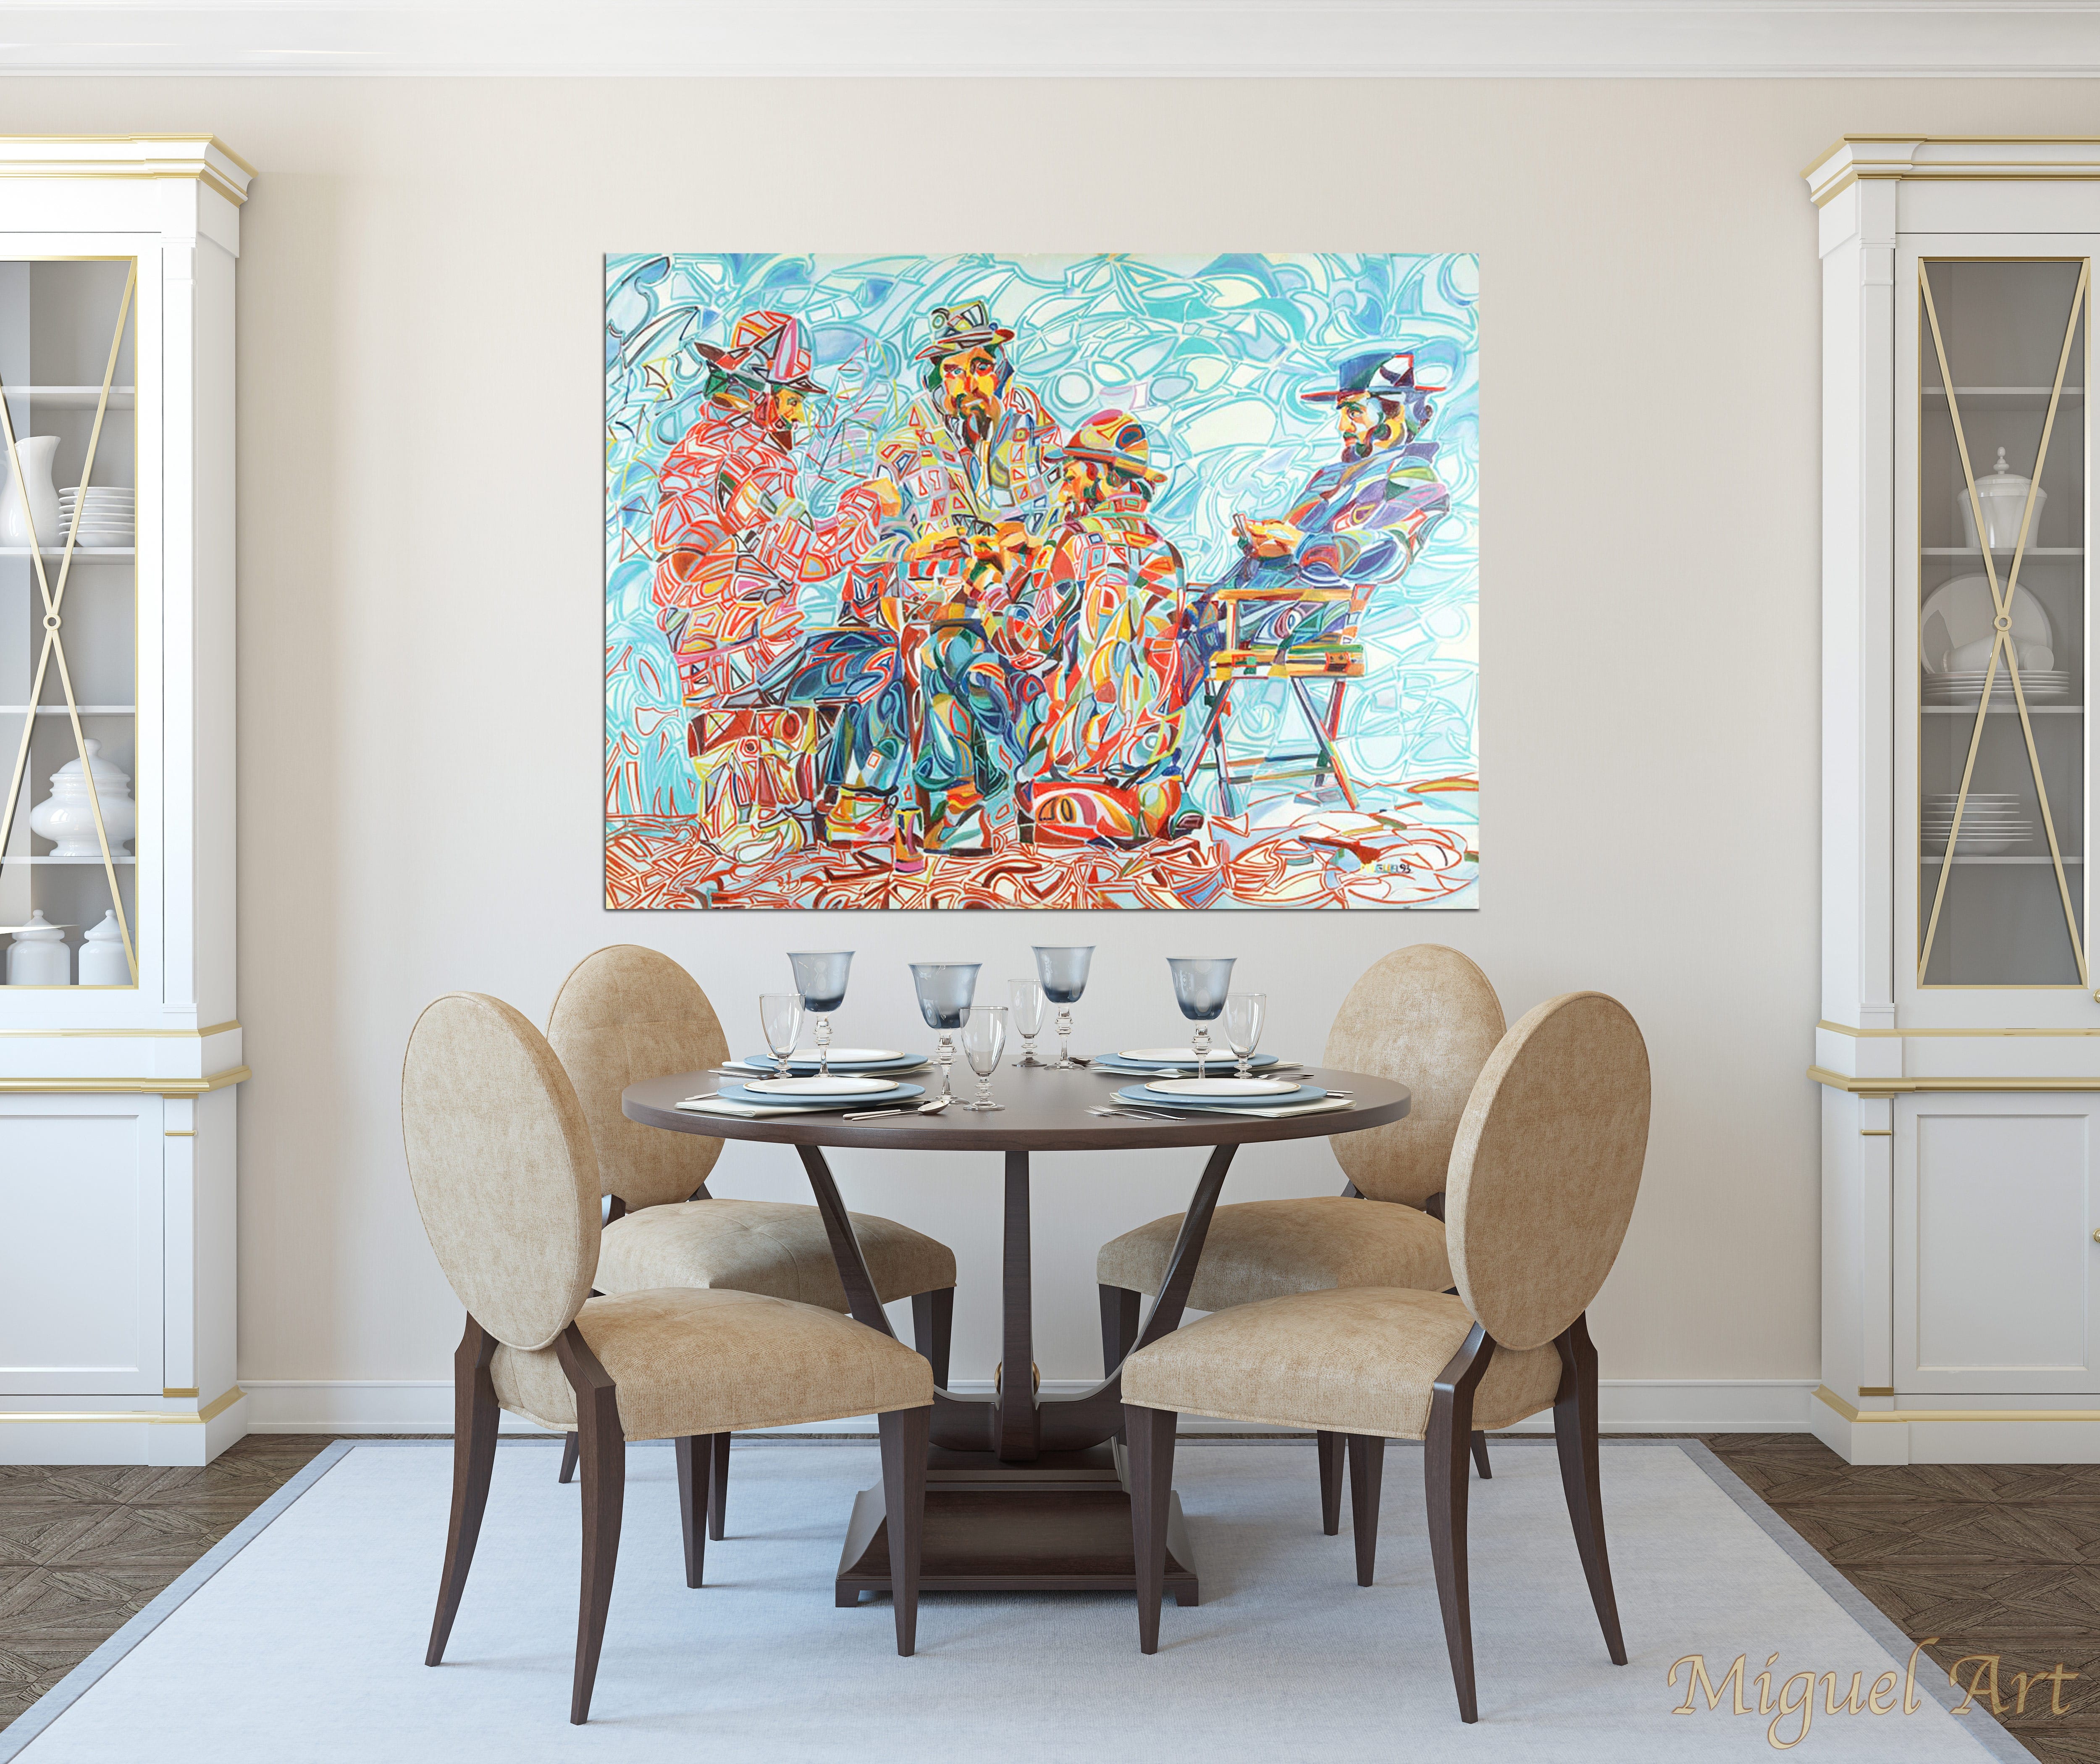 Painting of All In displayed in a dining room on a cream wall